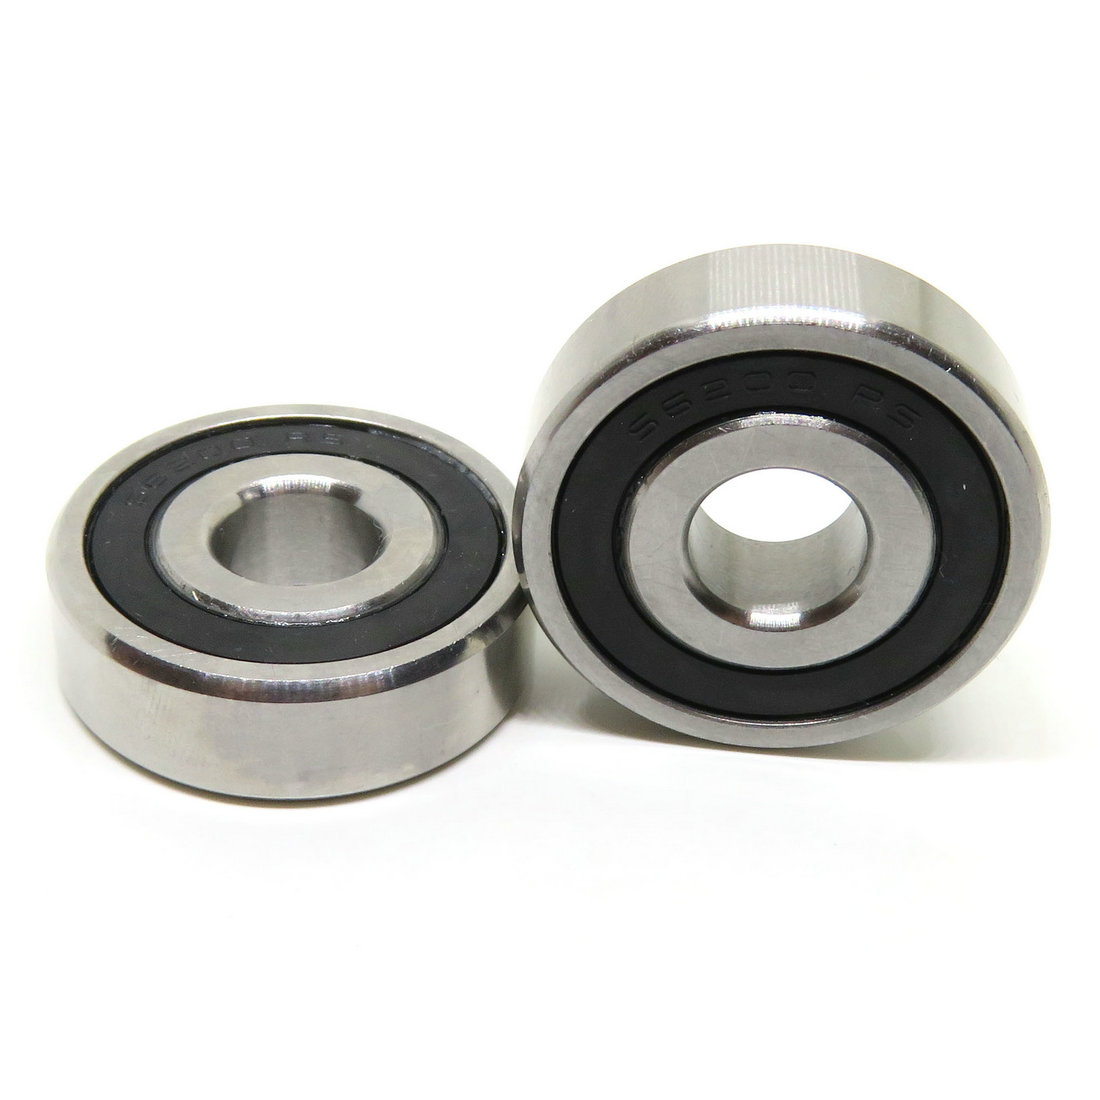 Durability Stainless Steel Ball Bearing S6310RS 50mm x 110mm x 27mm S6310-2RS Seals .jpg